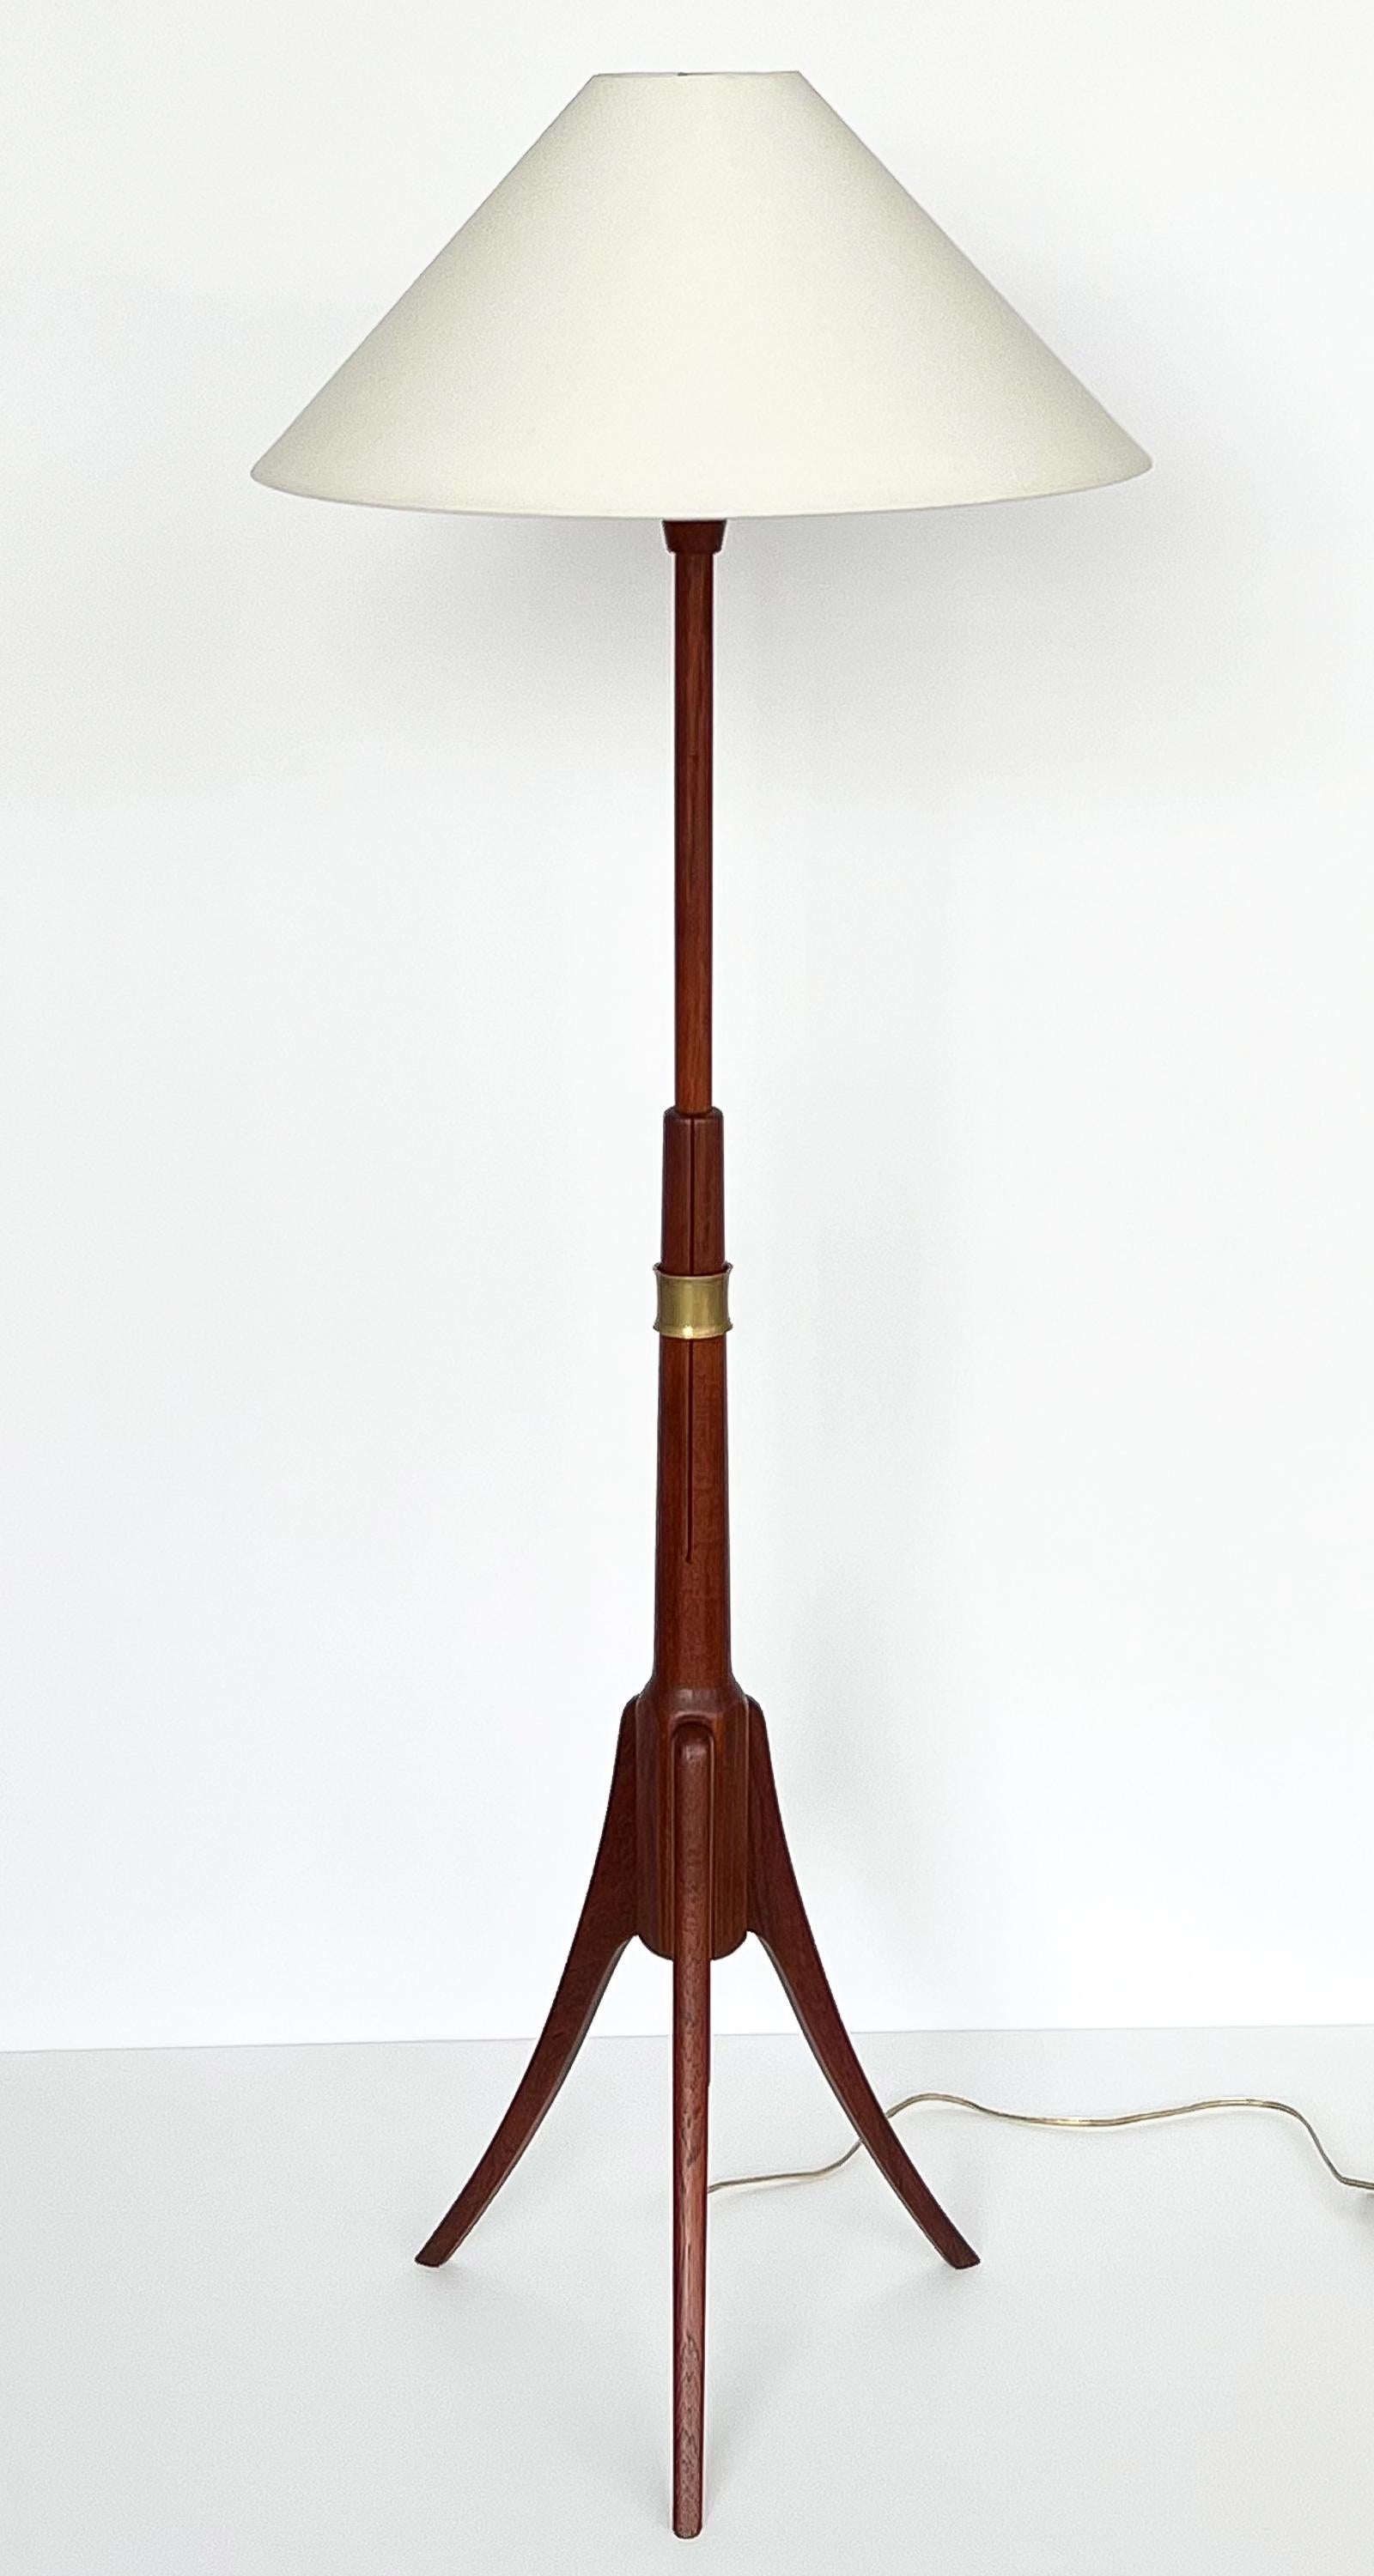 A unique mid century adjustable teak and brass floor lamp, Sweden circa 1950s. Solid teak construction with flared tripod base. Clothespin shaped stem with 1.25